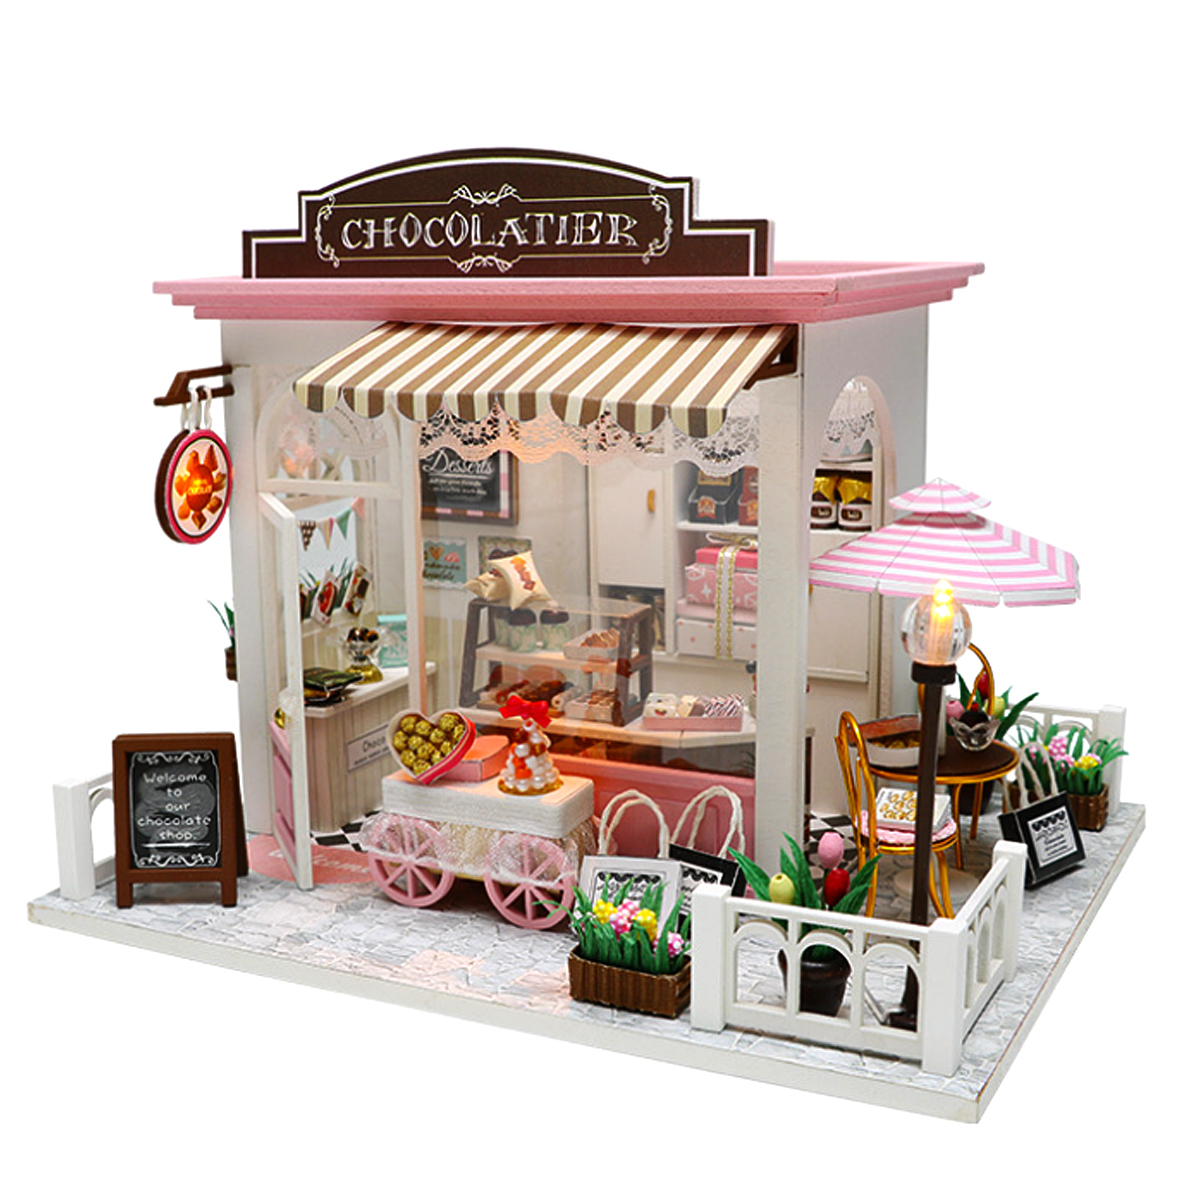 Christmas Gifts for kids, children, adult collectors, craft project, DIY Chocolate Shop Dollhouse (With Sound & LED Light Device)